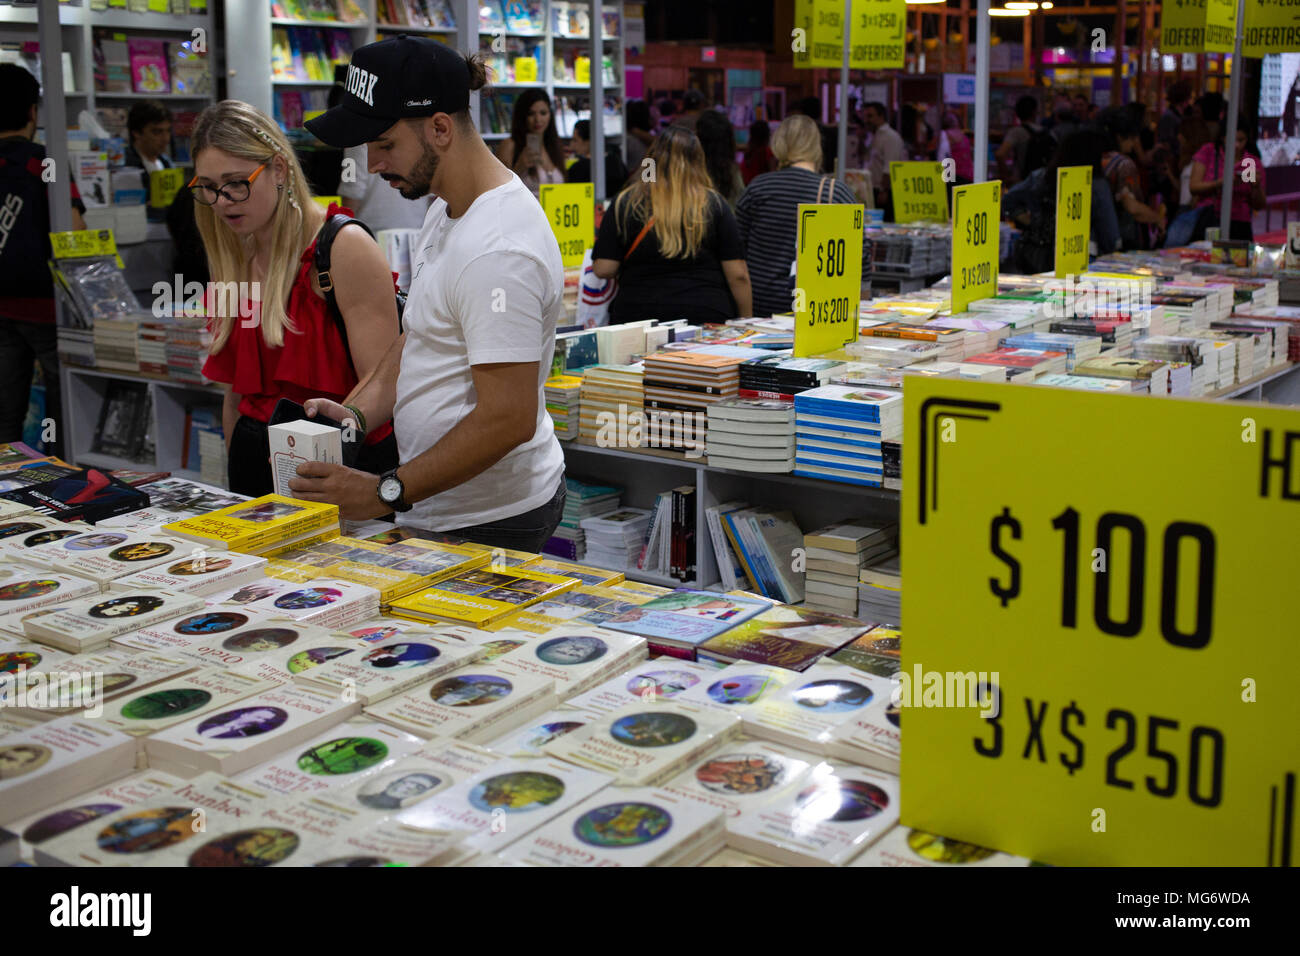 BUENOS AIRES, ARGENTINA - APRIL 26:. The 2018 edition of Buenos Aires International Book Fair, one of the most important events for the editorial industry in Latin America. April 26, 2018 in  Buenos Aires, Argentina. Credit: buteo/Alamy Live News Stock Photo